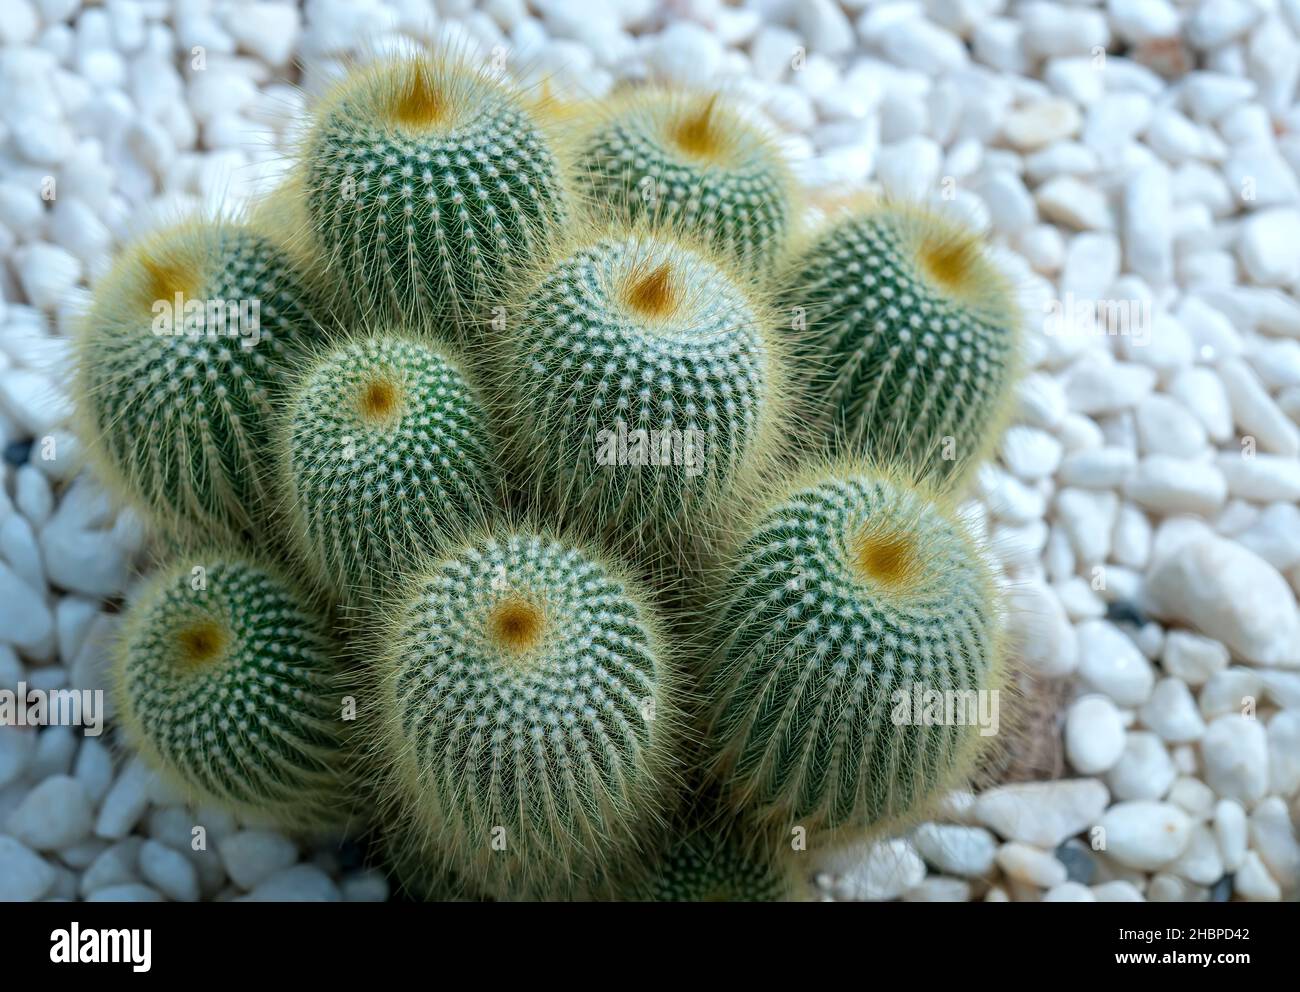 Cactus or Succulent flowerbeds plant in the garden. This is a species of cactus family that is resistant to extreme weather and is decorated Stock Photo